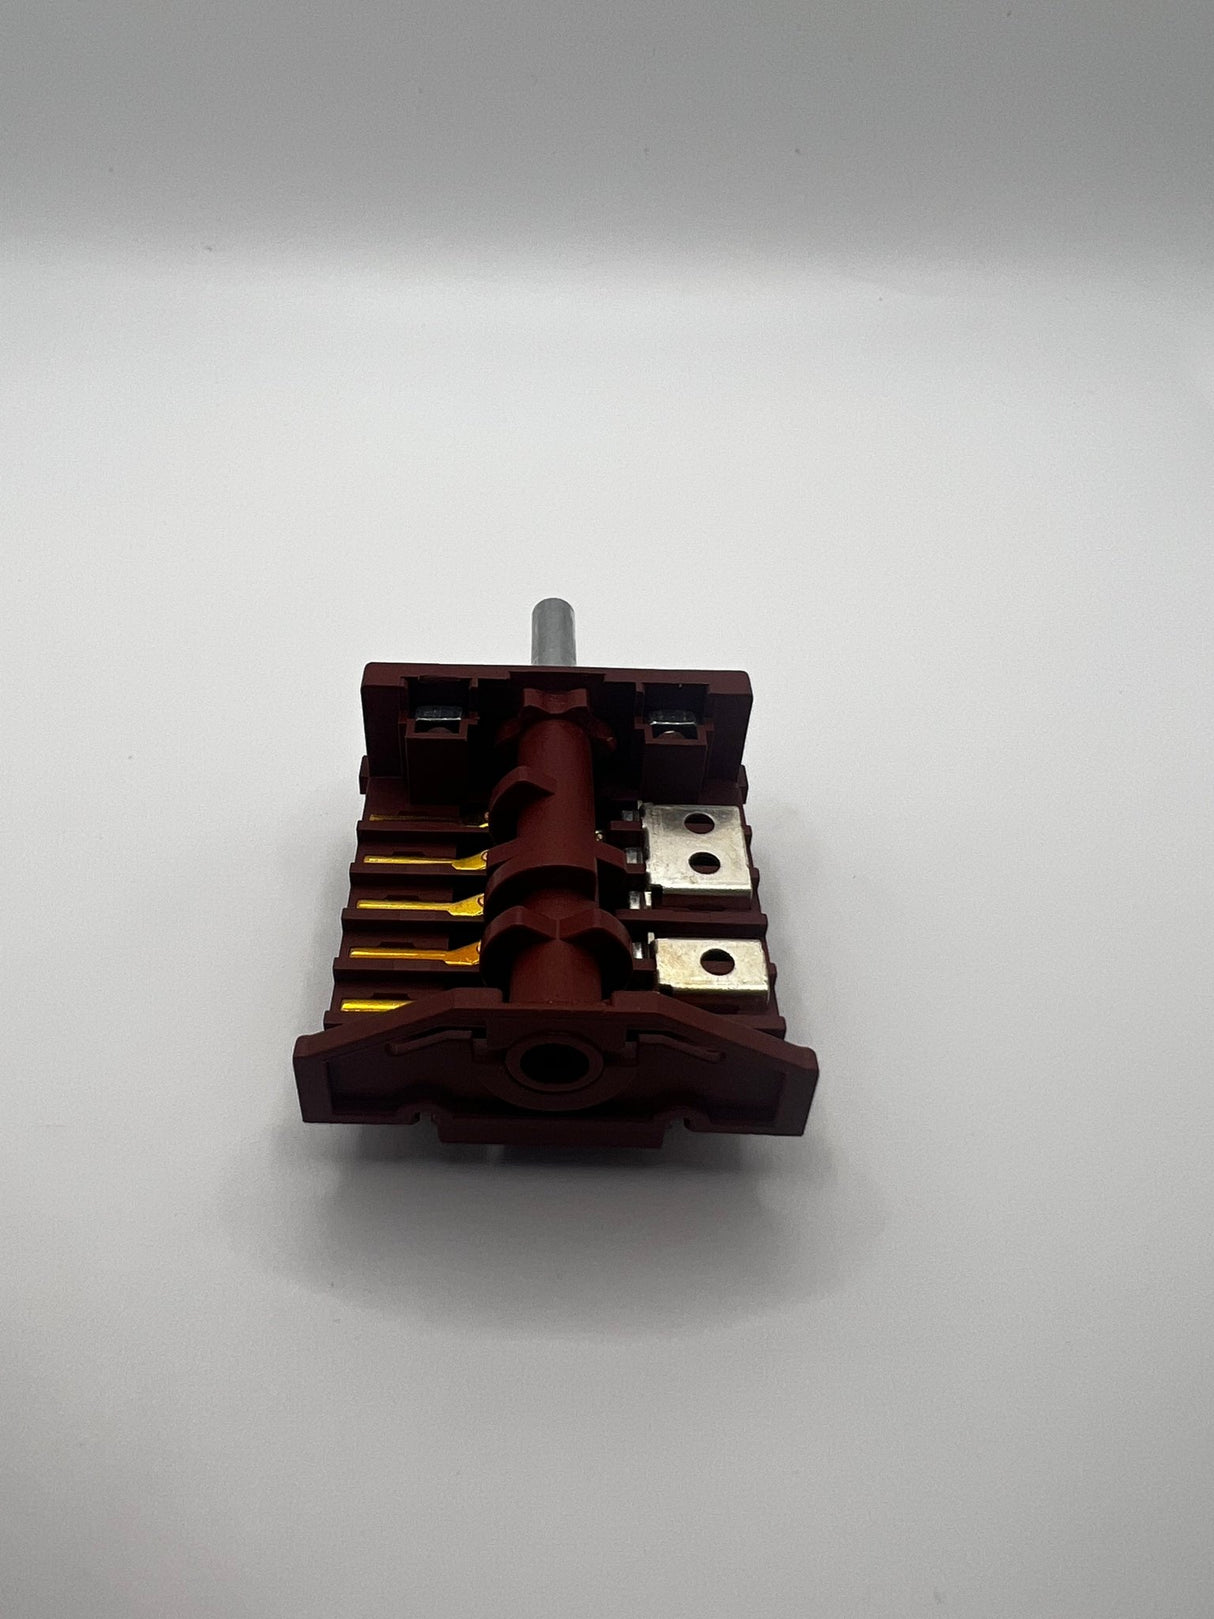 Euro Oven Selector Switch 17471100000346 - My Oven Spares-Euromaid-17471100000346-6